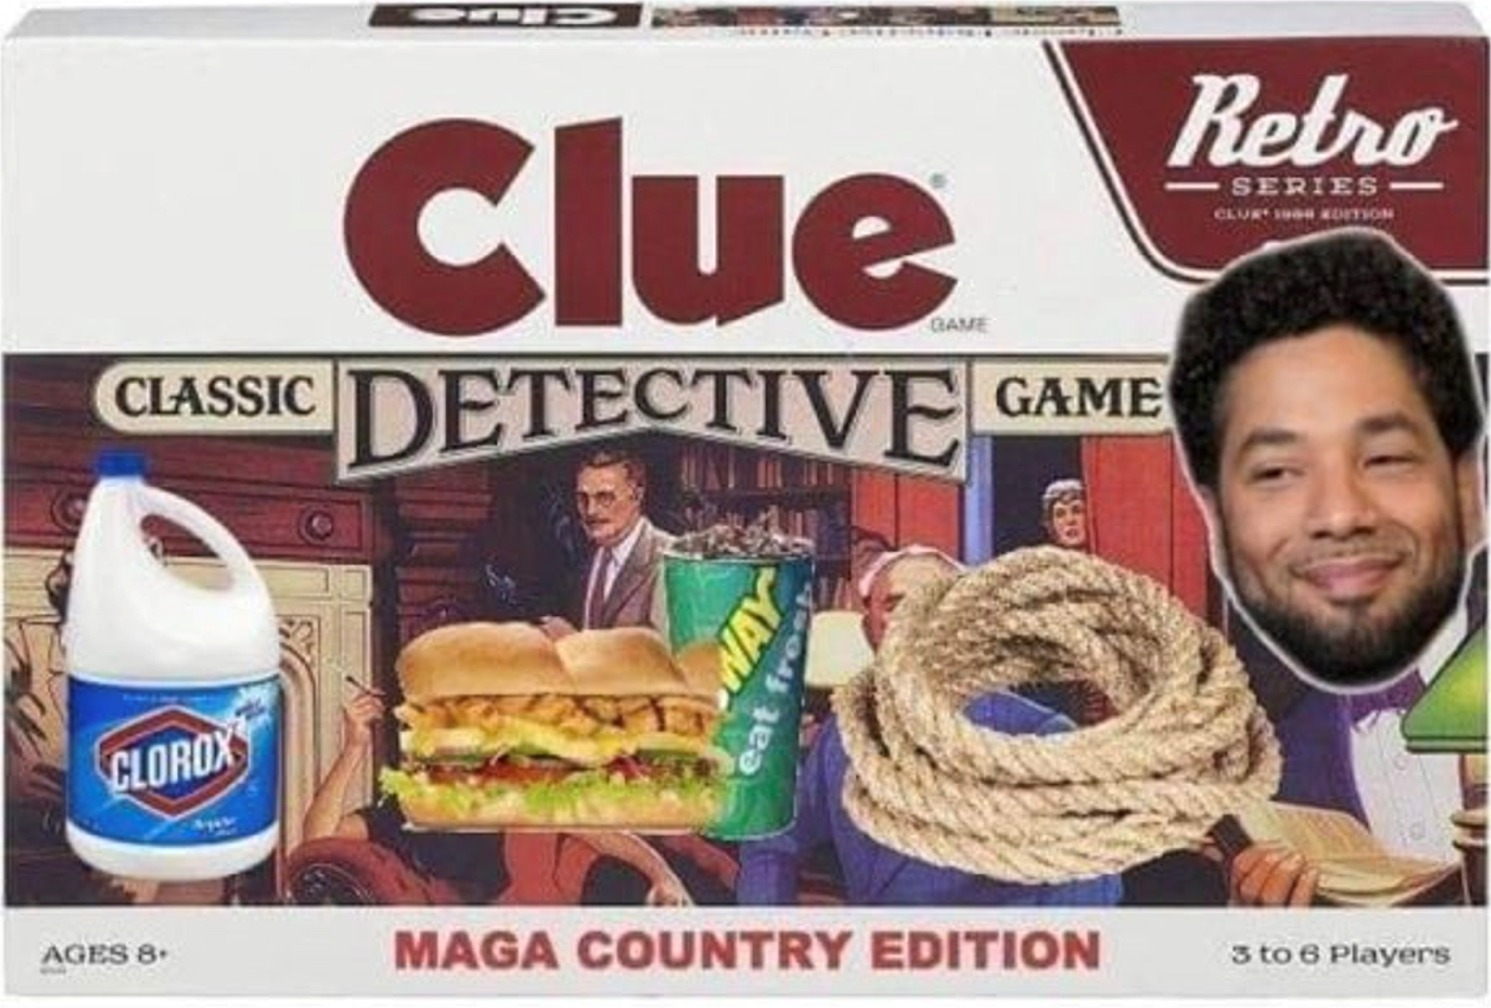 jussie smollett memes - best jussie smollett memes - Retro Clue Series Ceurs Som Gave Classic Detective Game Clorox Ages 8 Maga Country Edition 3 to 6 Players